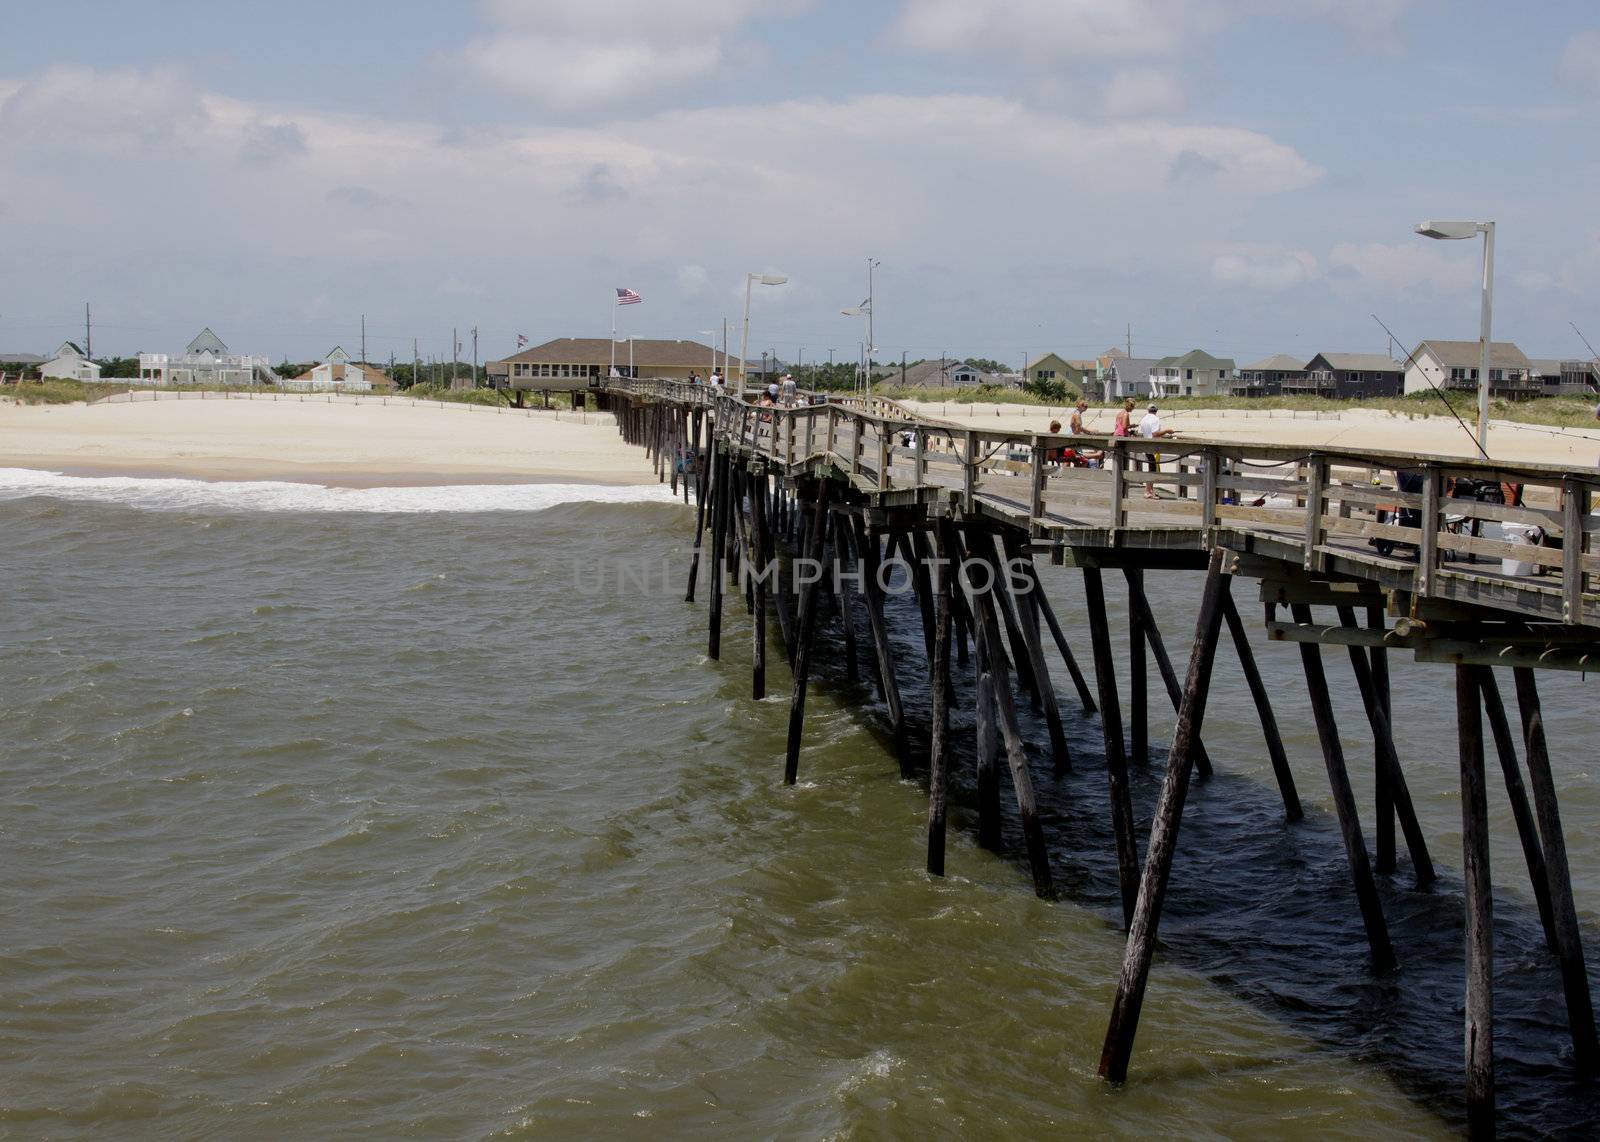 A large fishing pier in the Outer Banks, North Carolina.